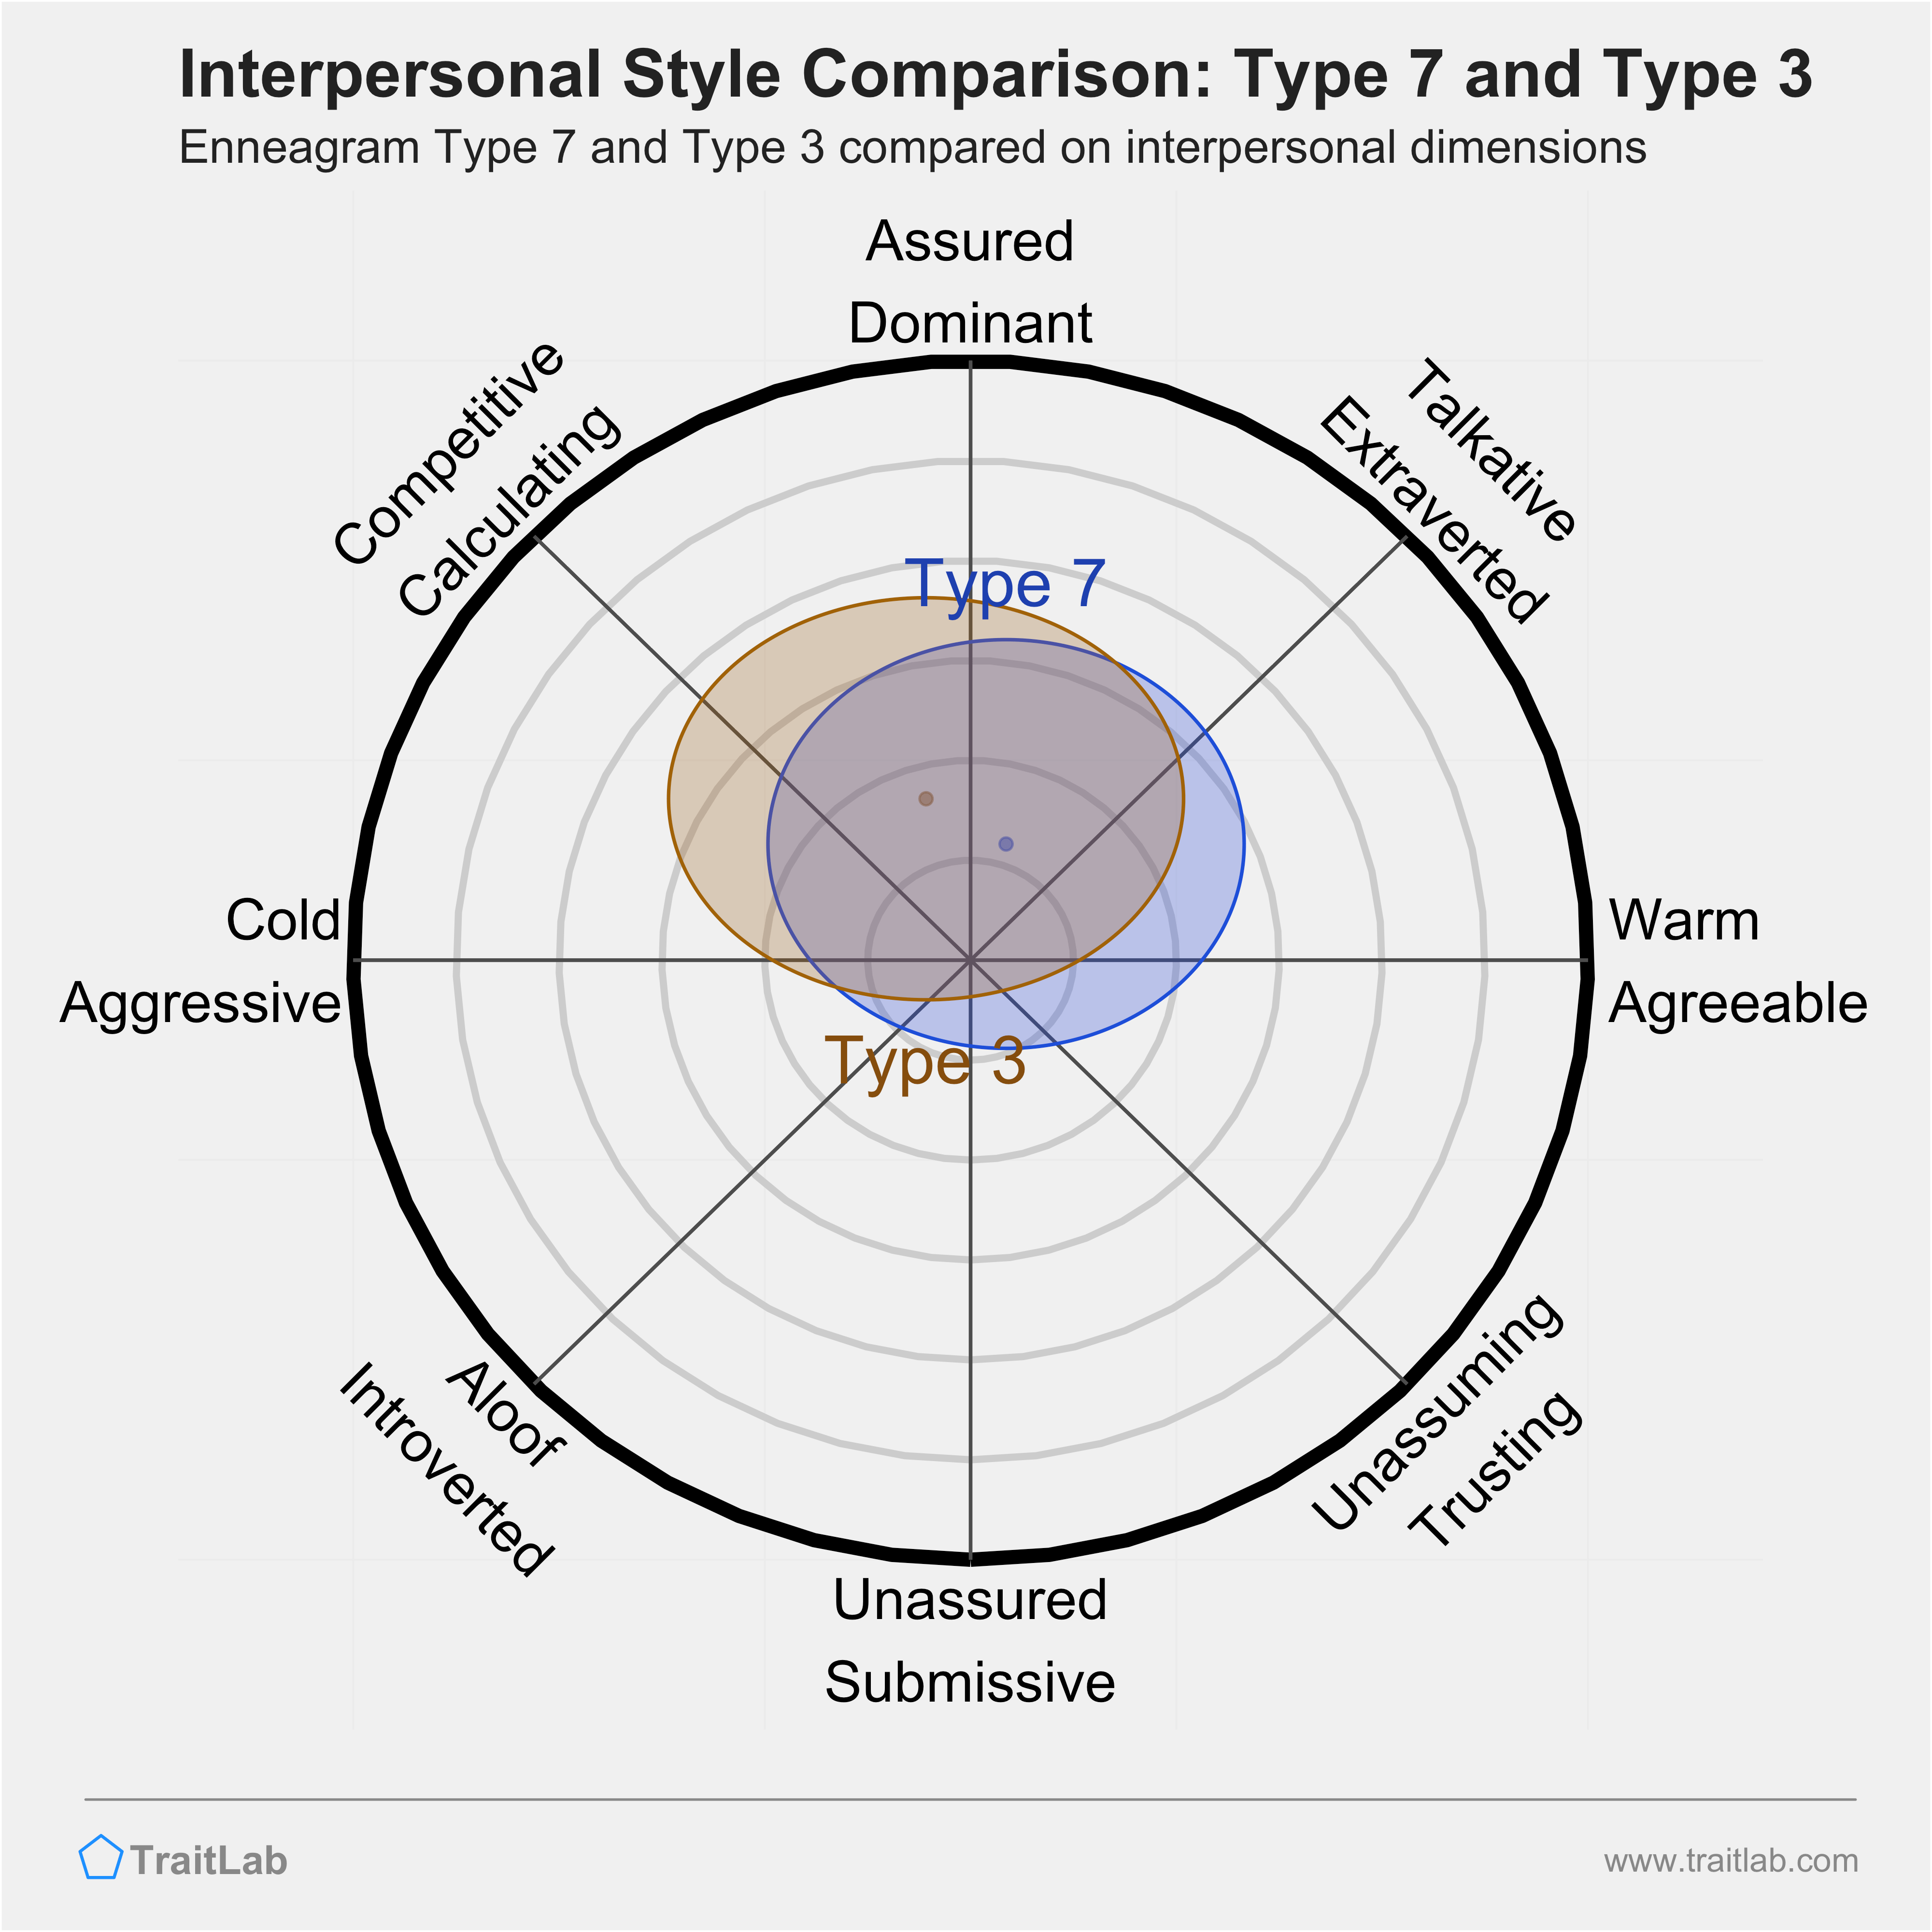 Enneagram Type 7 and Type 3 comparison across interpersonal dimensions